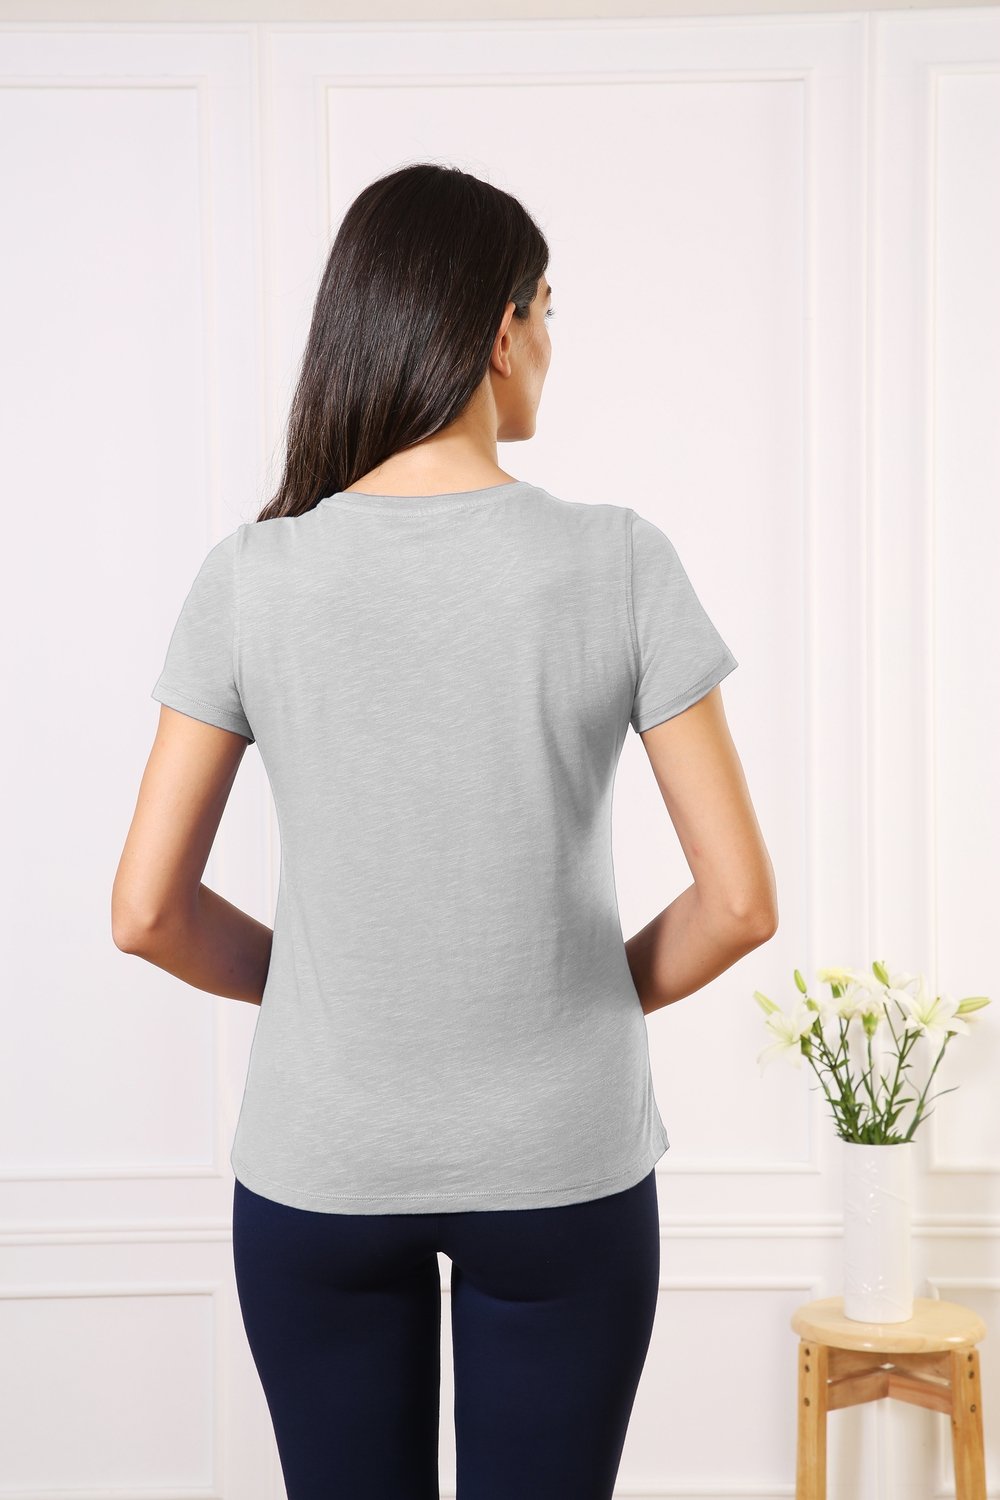 Cotton V-Neck Every day Wear Grey tee t-shirt tops for Girls - Stilento